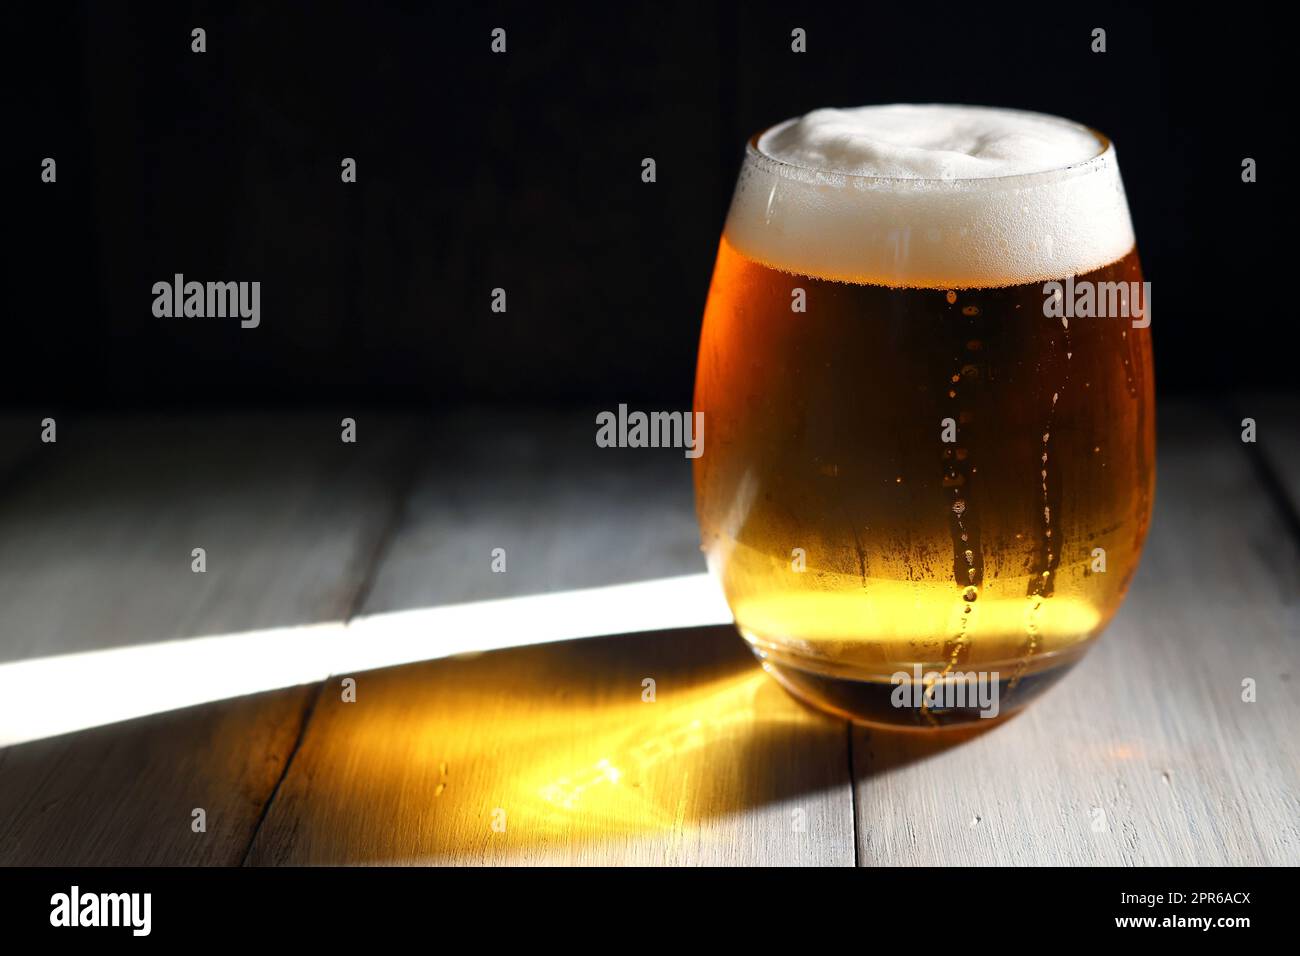 A frothy beer poured into a short, rounded glass illuminated by the strong afternoon light Stock Photo